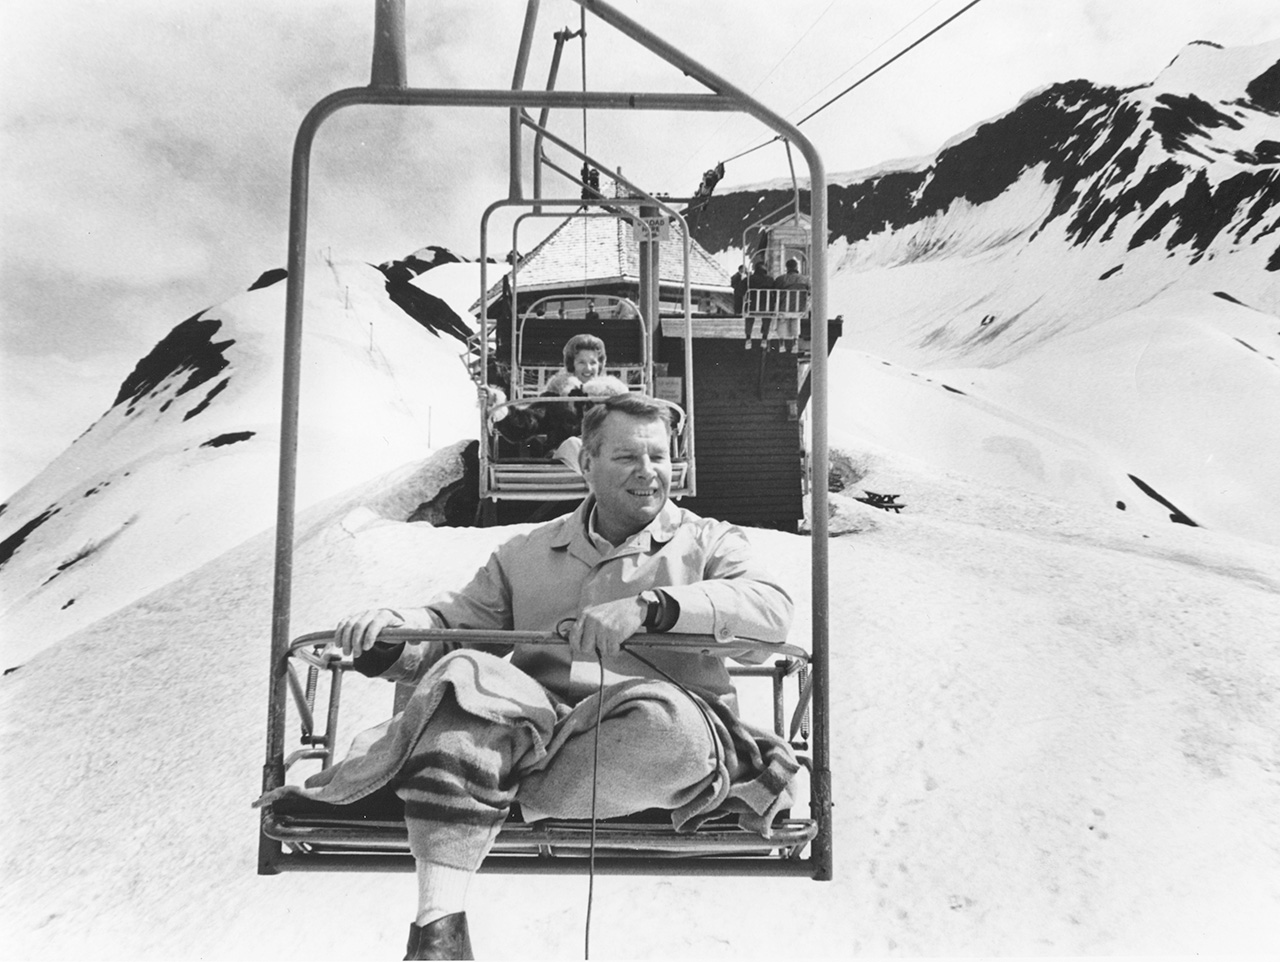 A man on a ski lift, with mountains in the background.